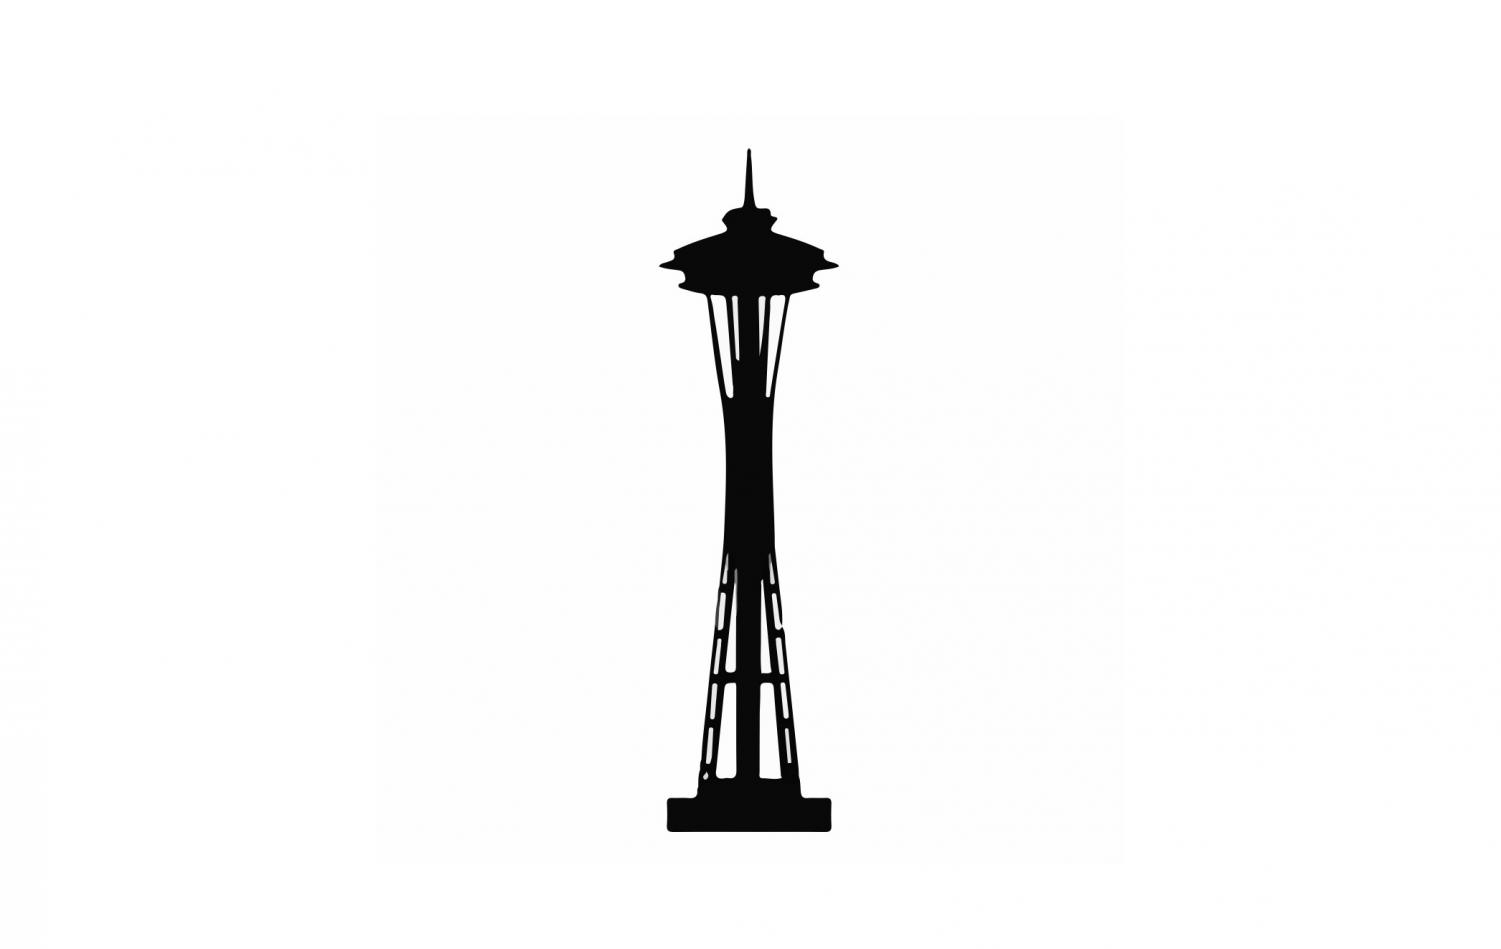 Seattle+Space+Needle%3B+local+news+graphic+to+be+used+for+local+news.+Art+by+Aditi+Jain+